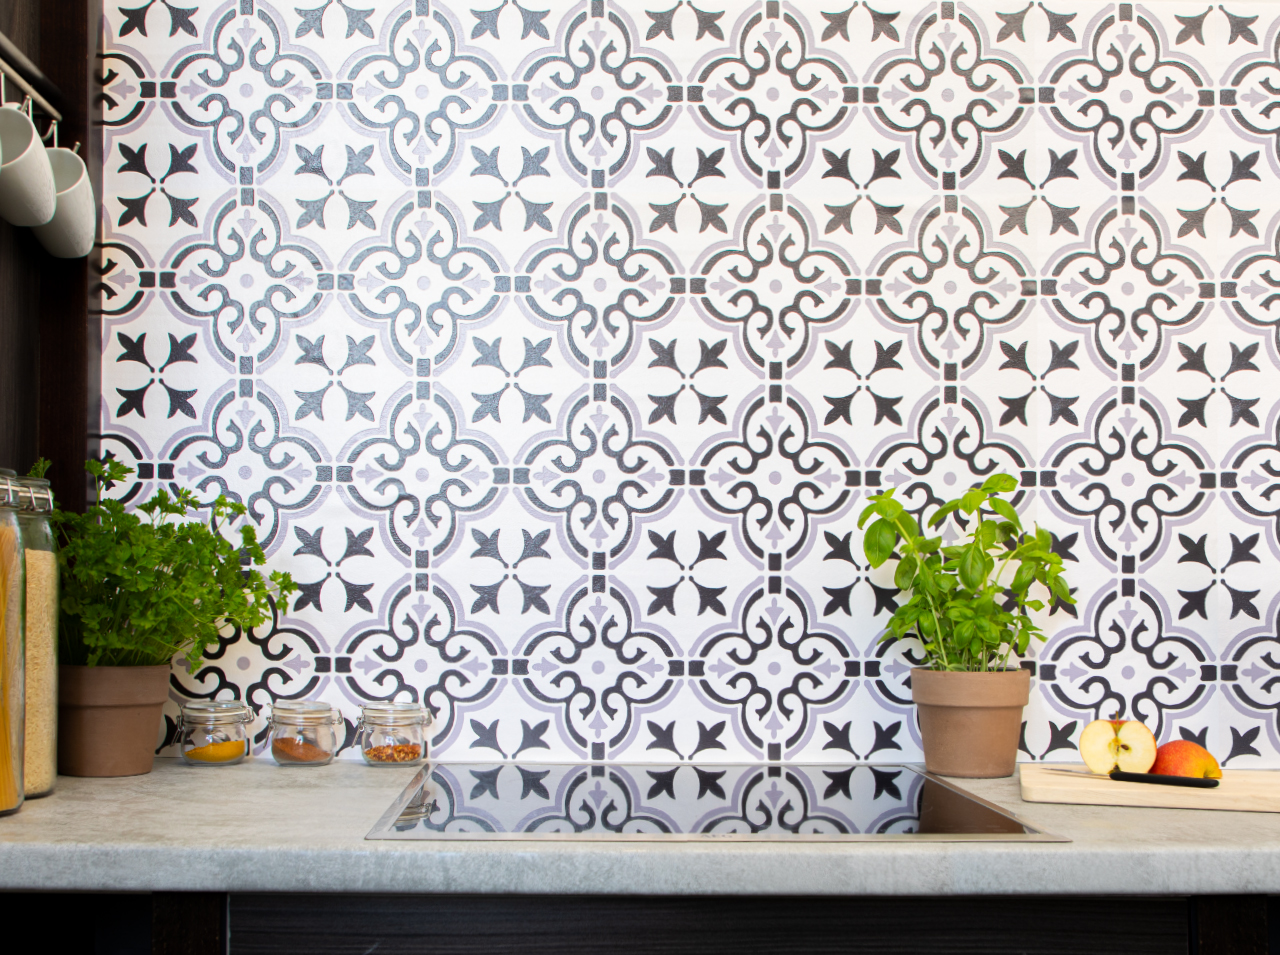 Give your kitchen wall a tiled look featuring an ornamental floral pattern.